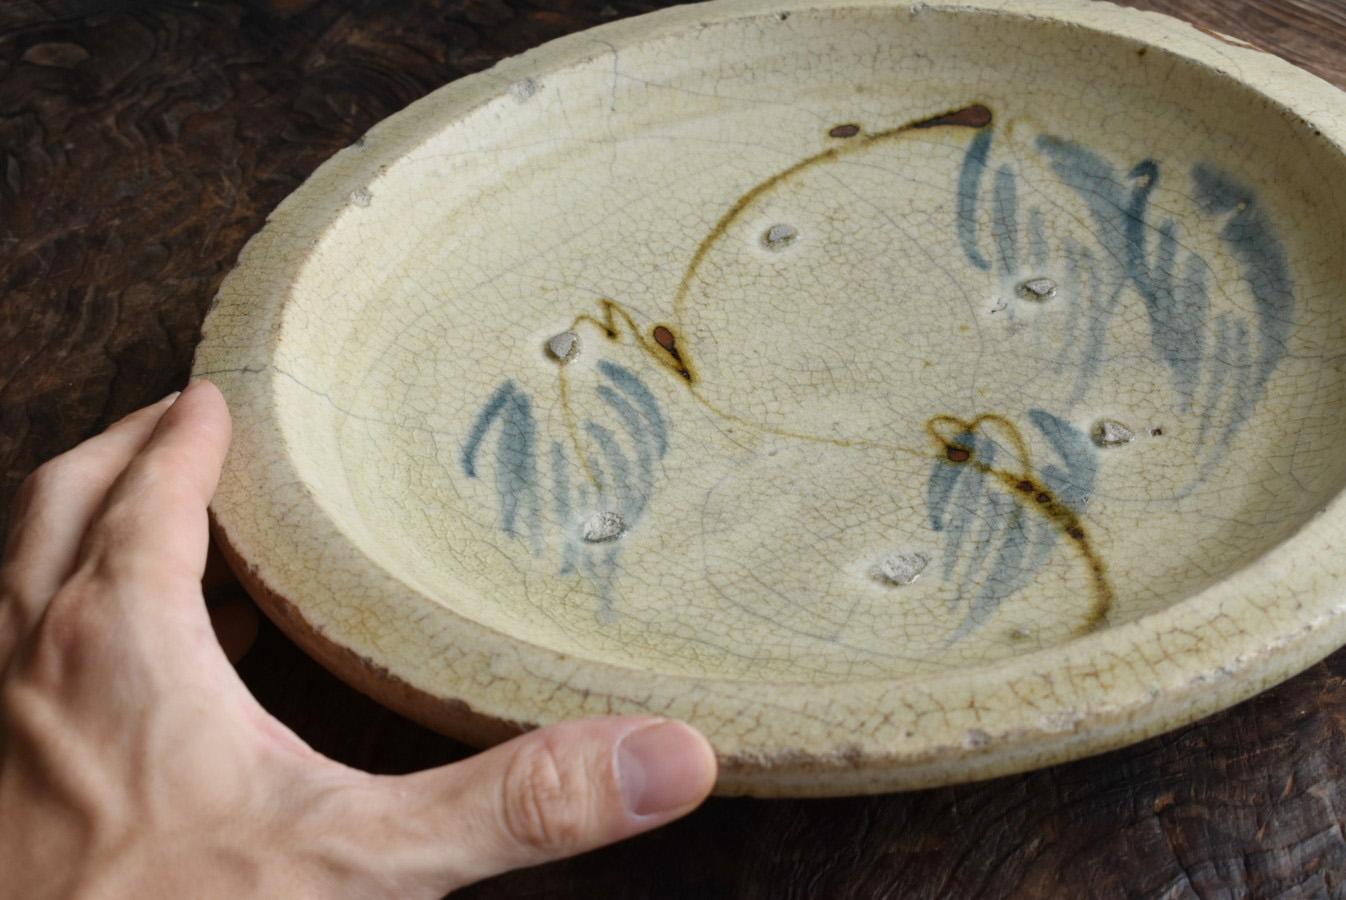 This is a plate made in the middle to late Edo period (1700-1850) in Japan.

It is a plate baked in Seto, and is called 